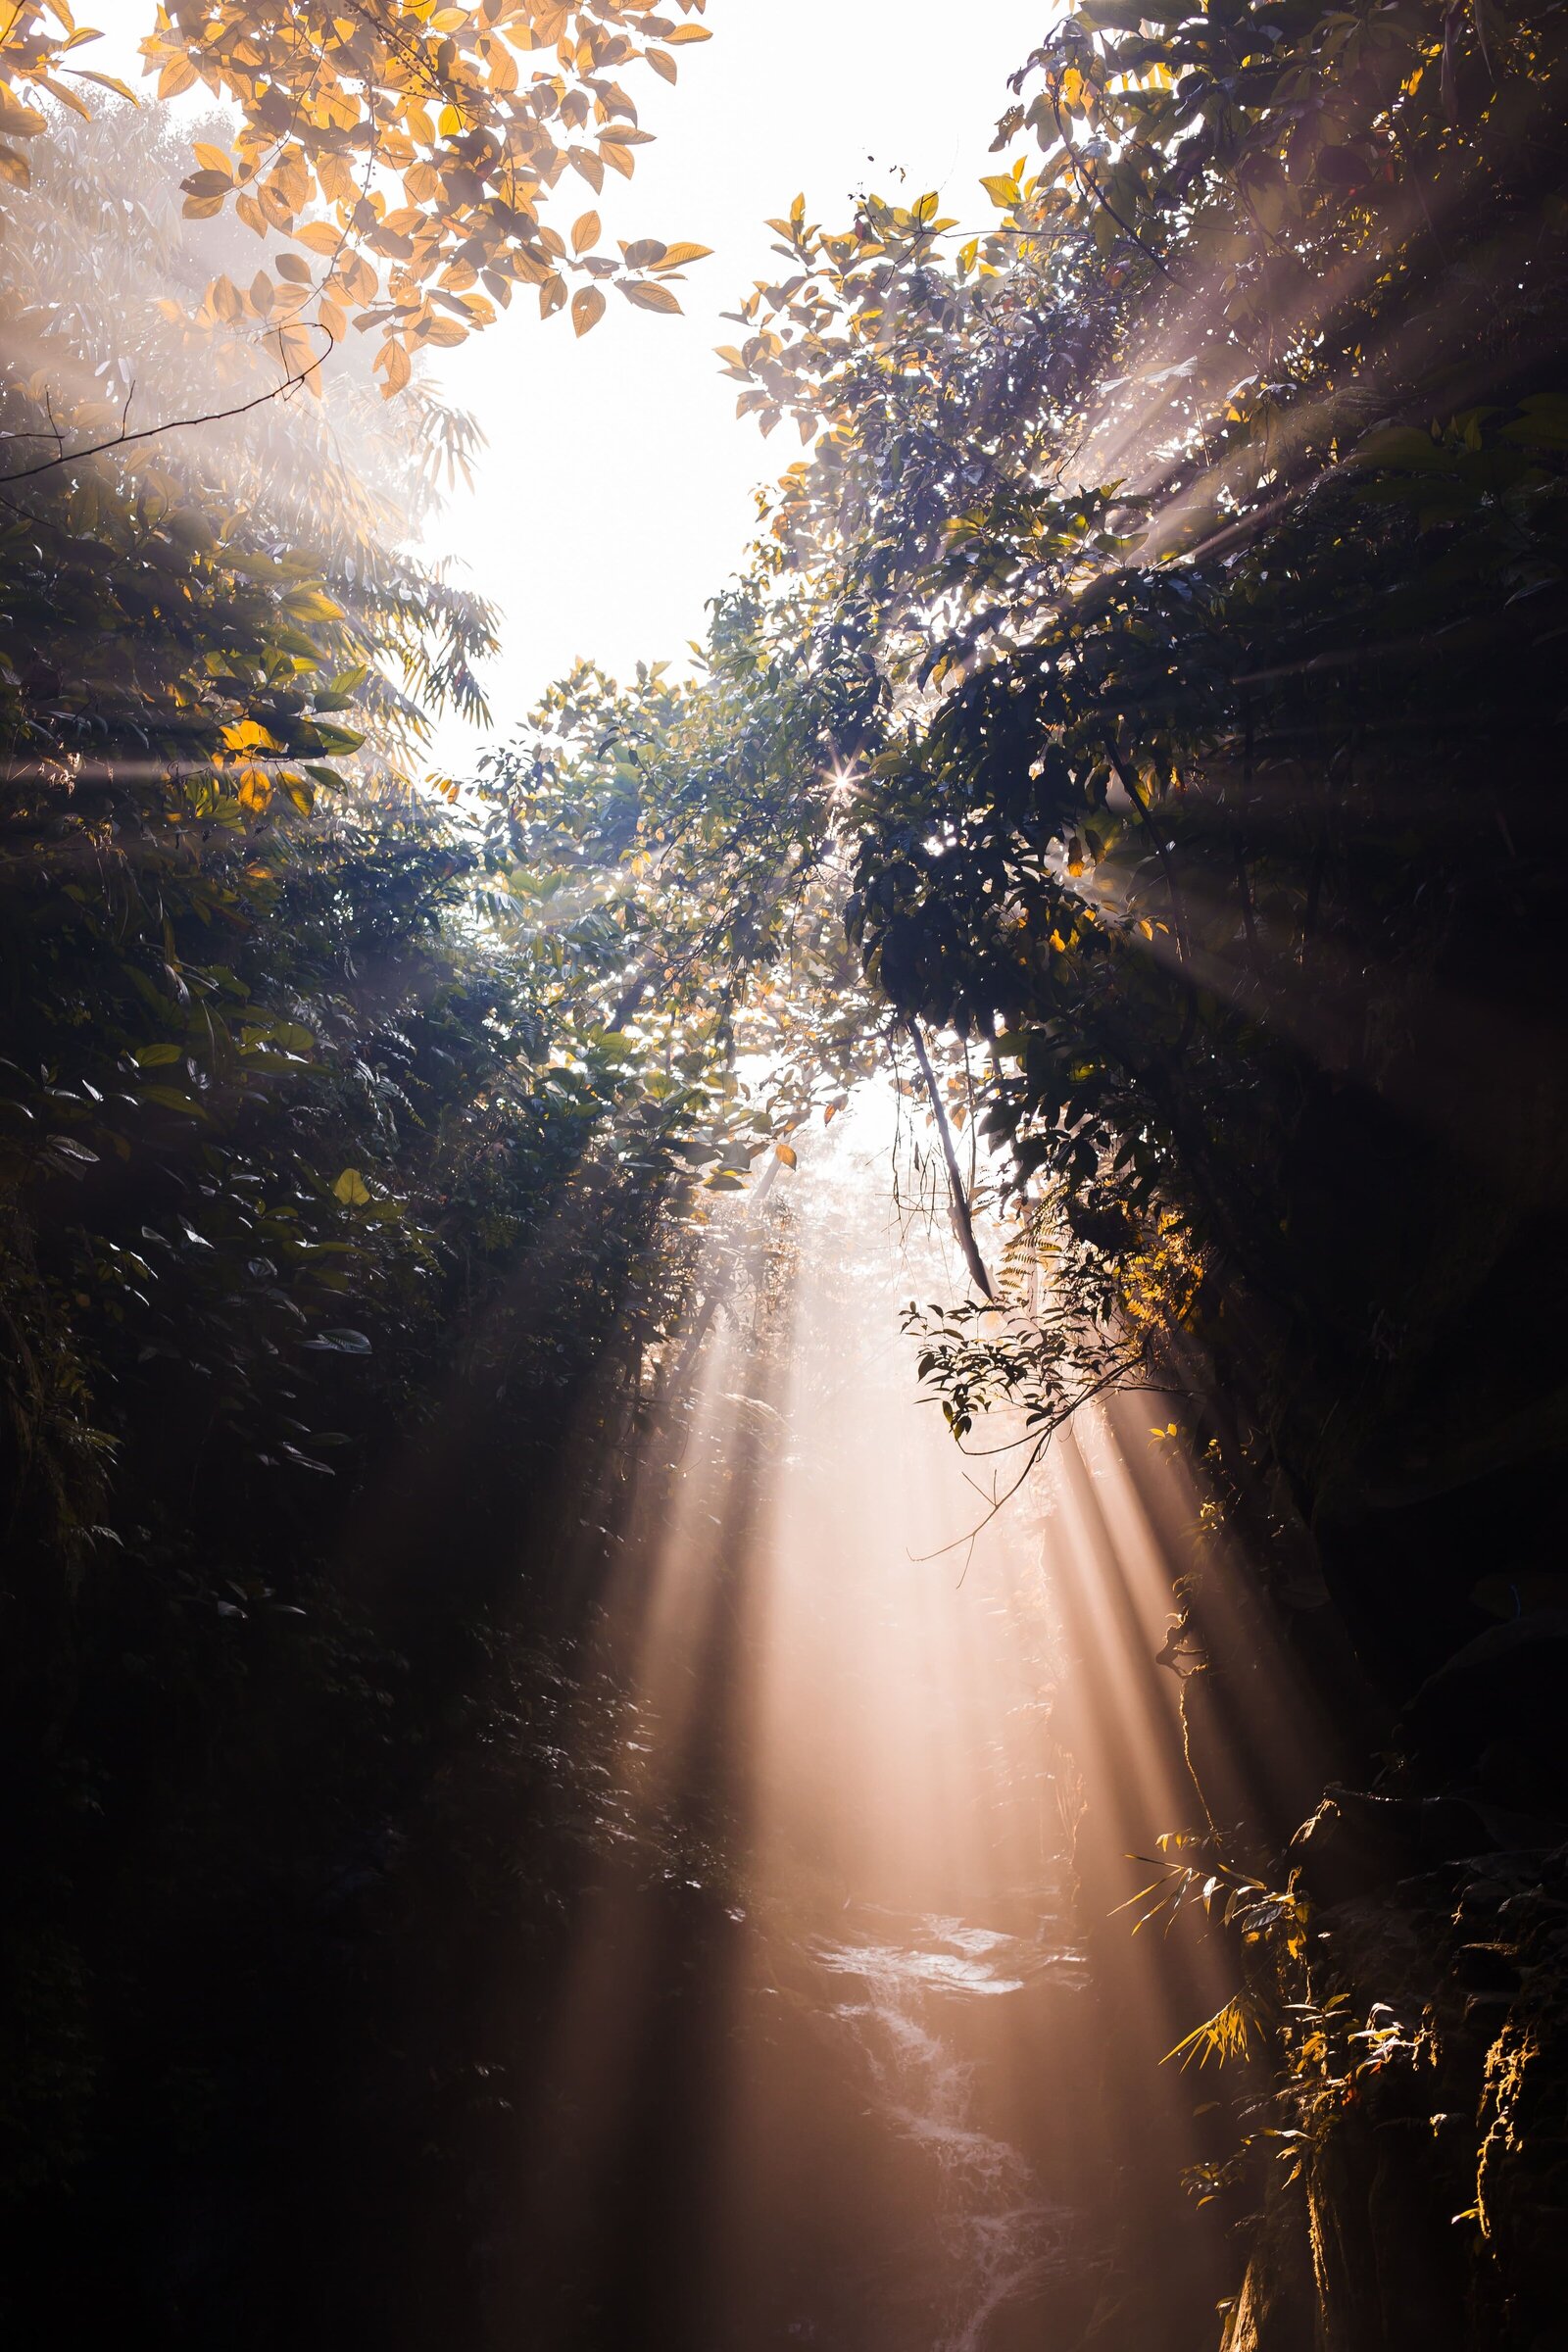 Sunlight beaming down with camera angle looking up into trees in a forest